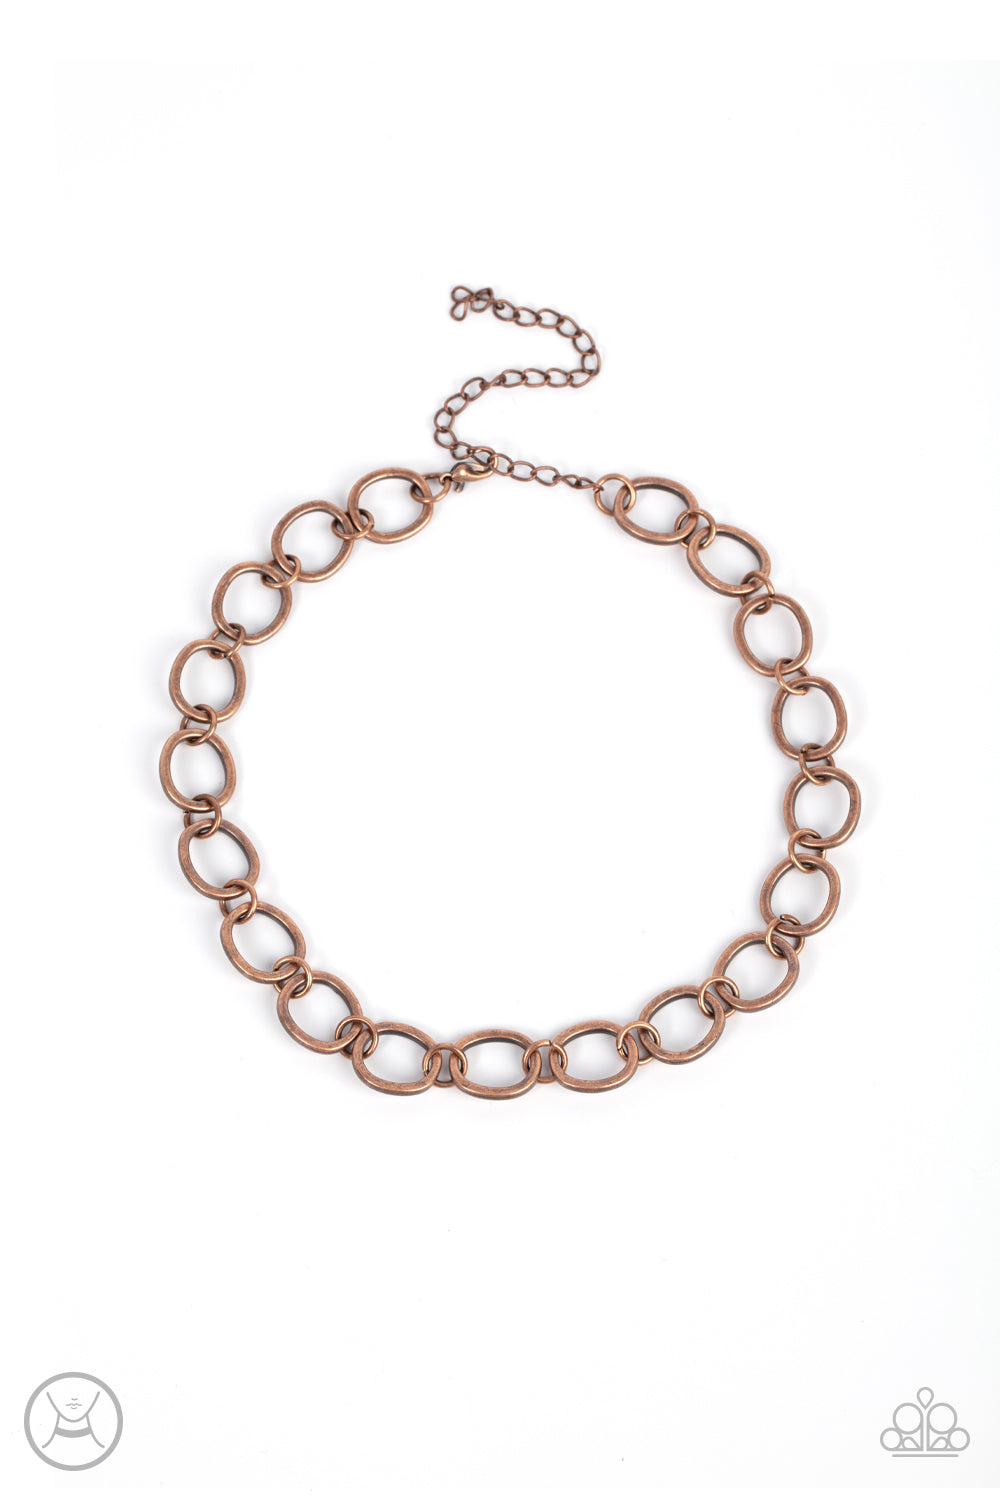 90s Nostalgia Copper Choker Necklace - Paparazzi Accessories  Brushed in an antiqued finish, imperfectly shaped copper circles link together for a gritty industrial statement. Features an adjustable clasp closure.  All Paparazzi Accessories are lead free and nickel free!   Sold as one individual choker necklace. Includes one pair of matching earrings.